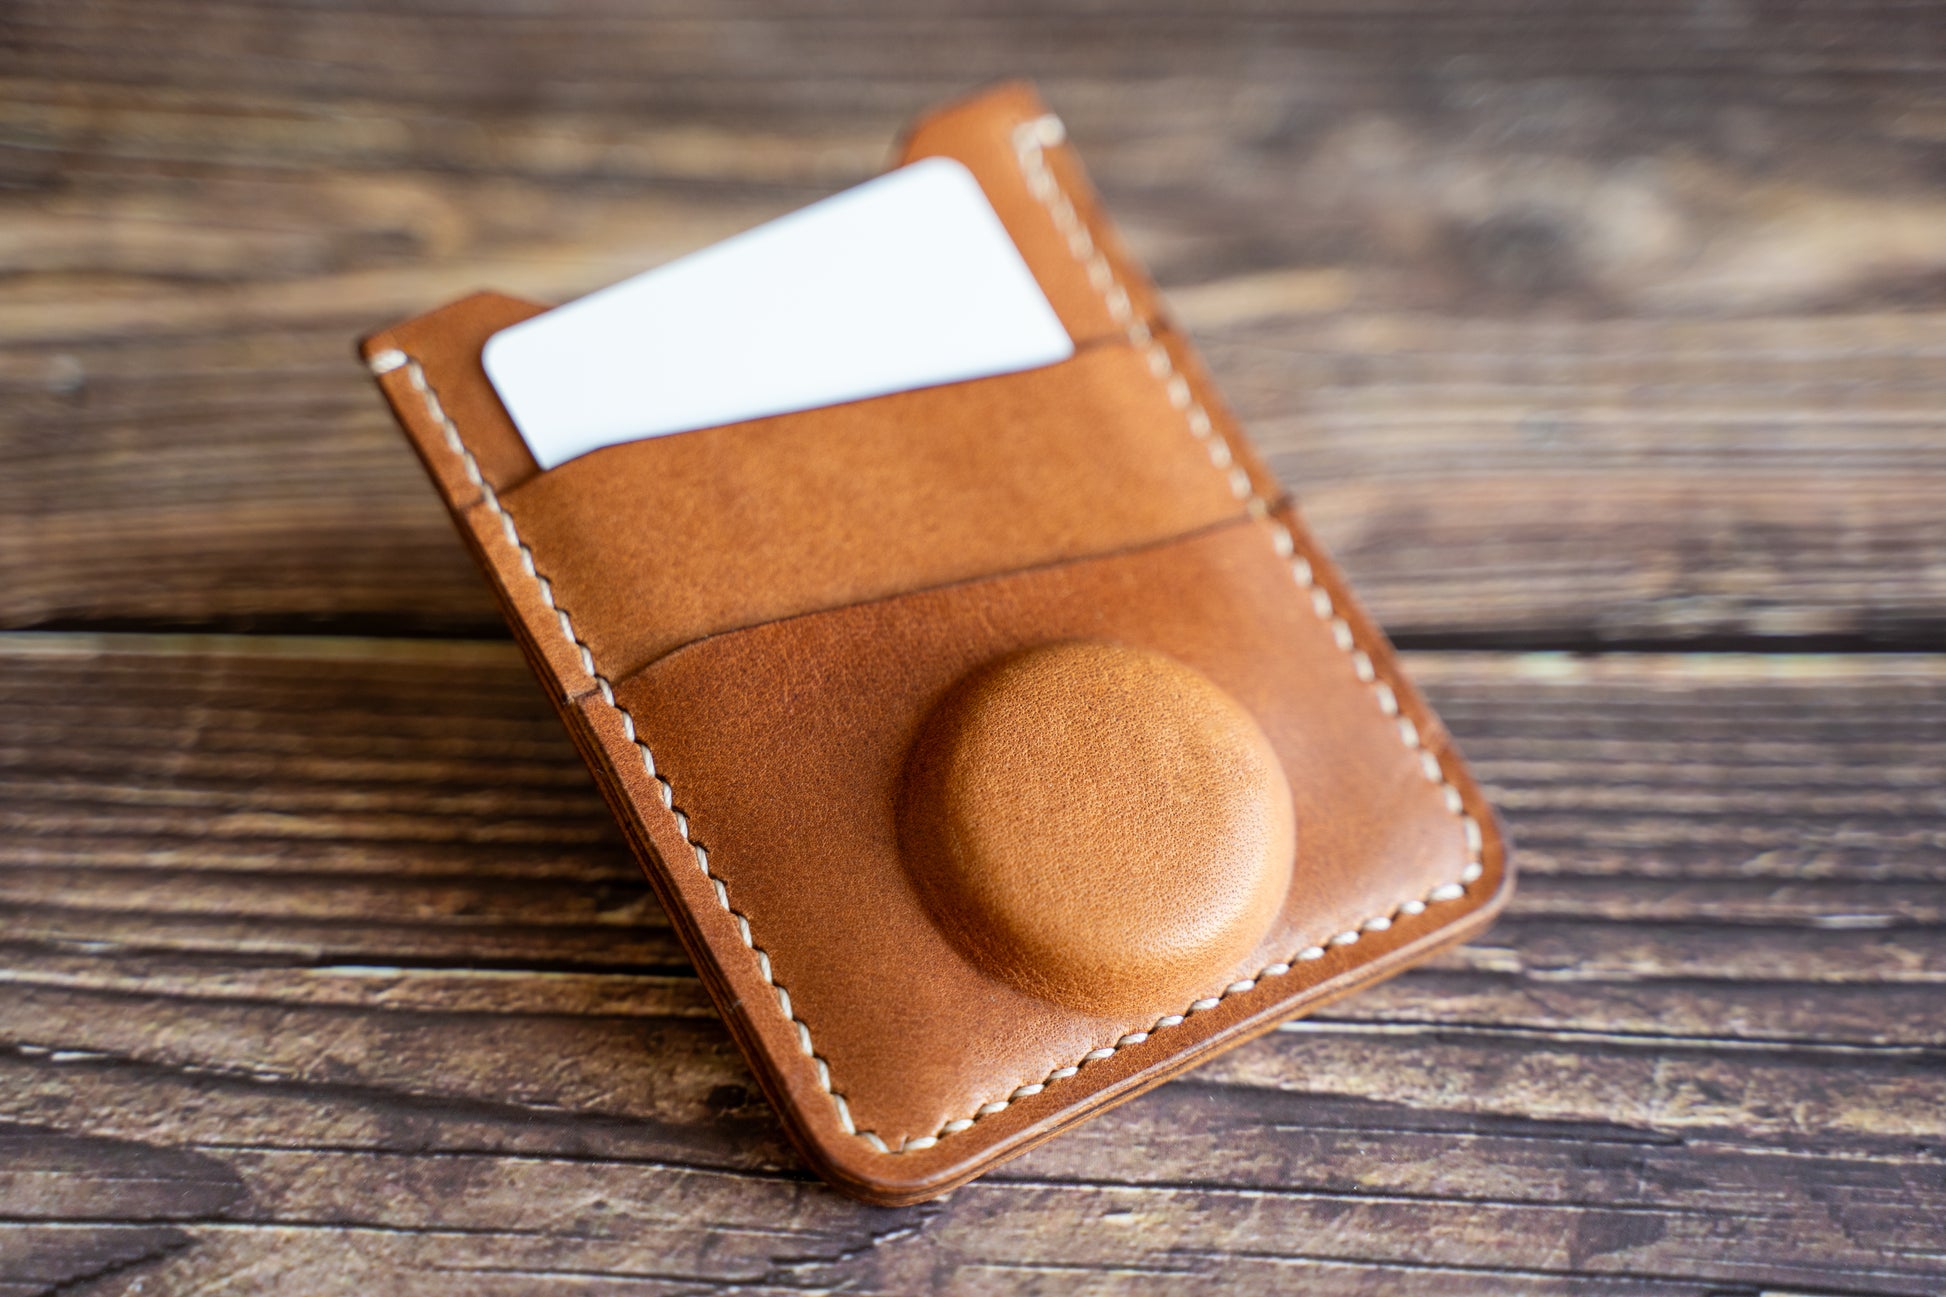 M1 Minimalist Wallet with space for Apple AirTag in front pocket